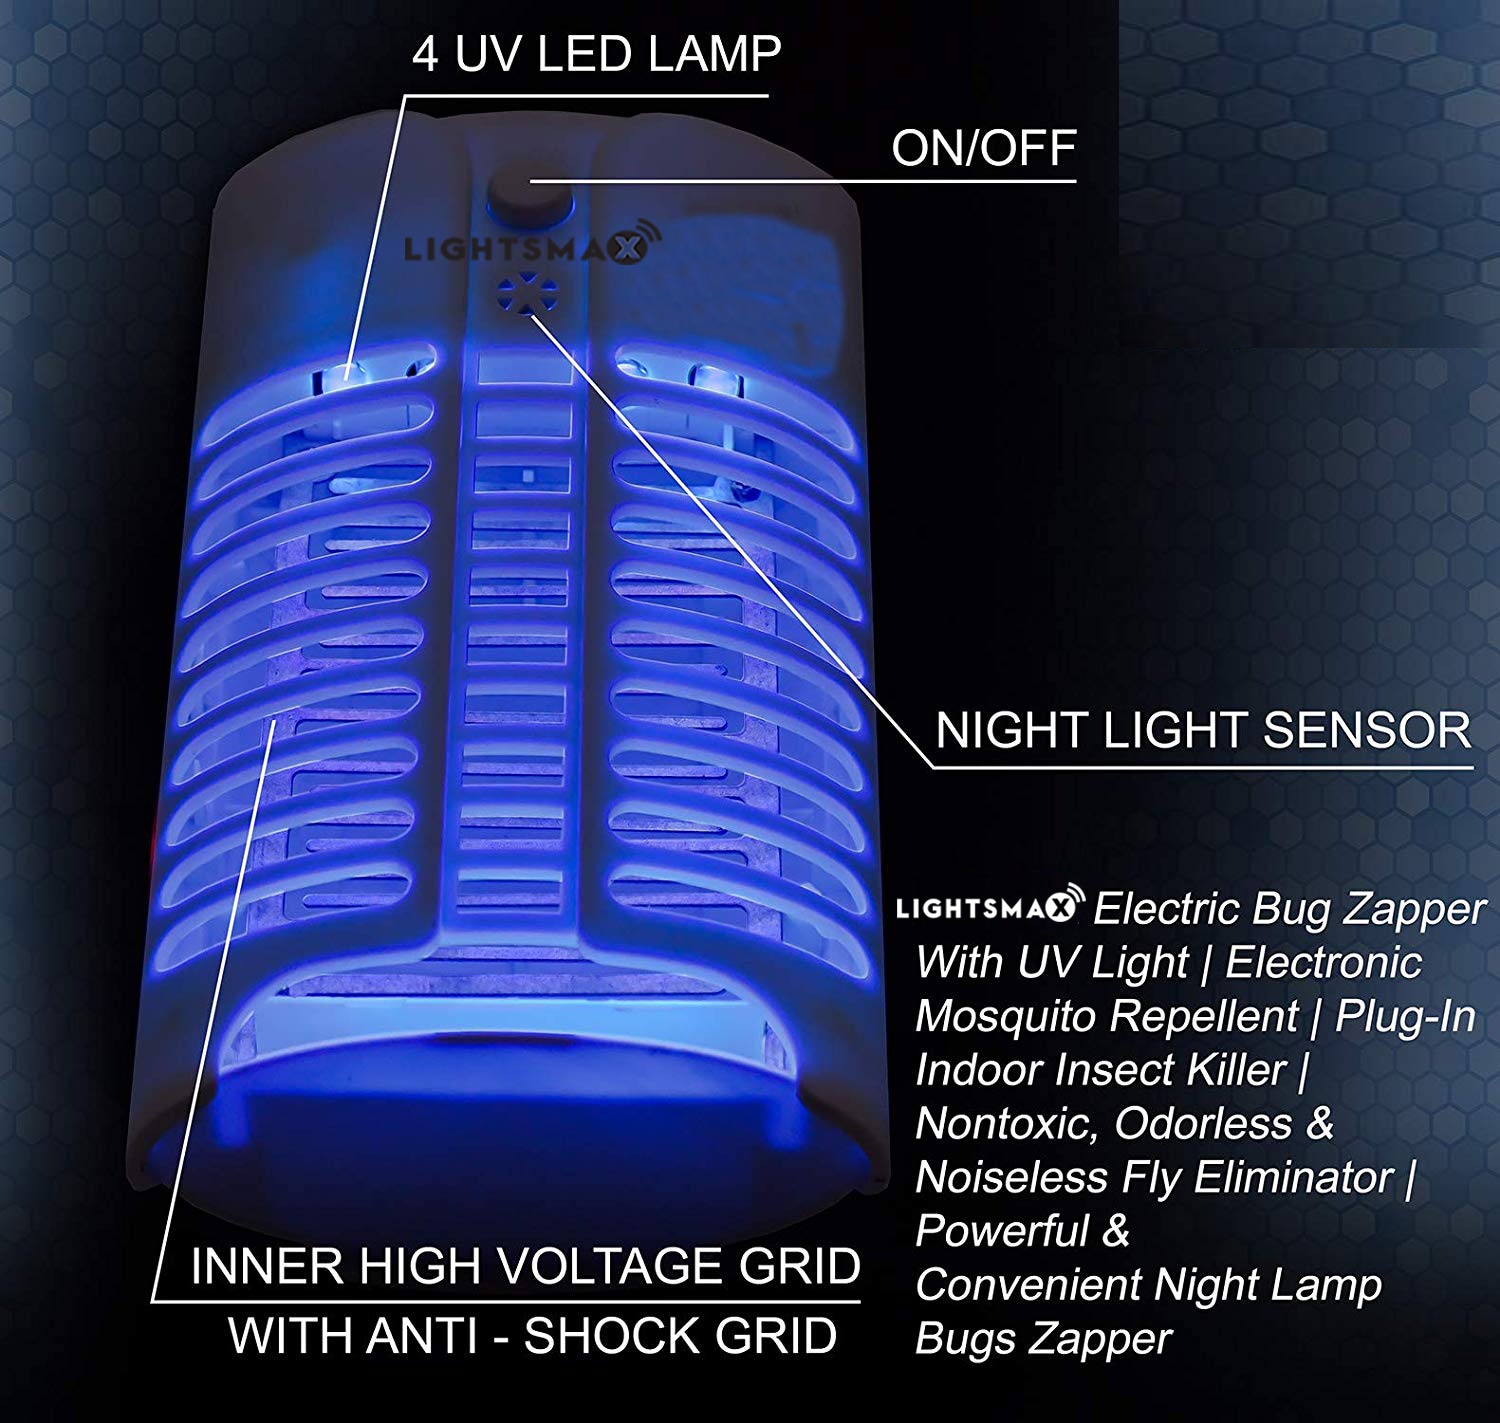 Electric Bug Zapper With Uv Light Trap/electronic Mosquito Killer